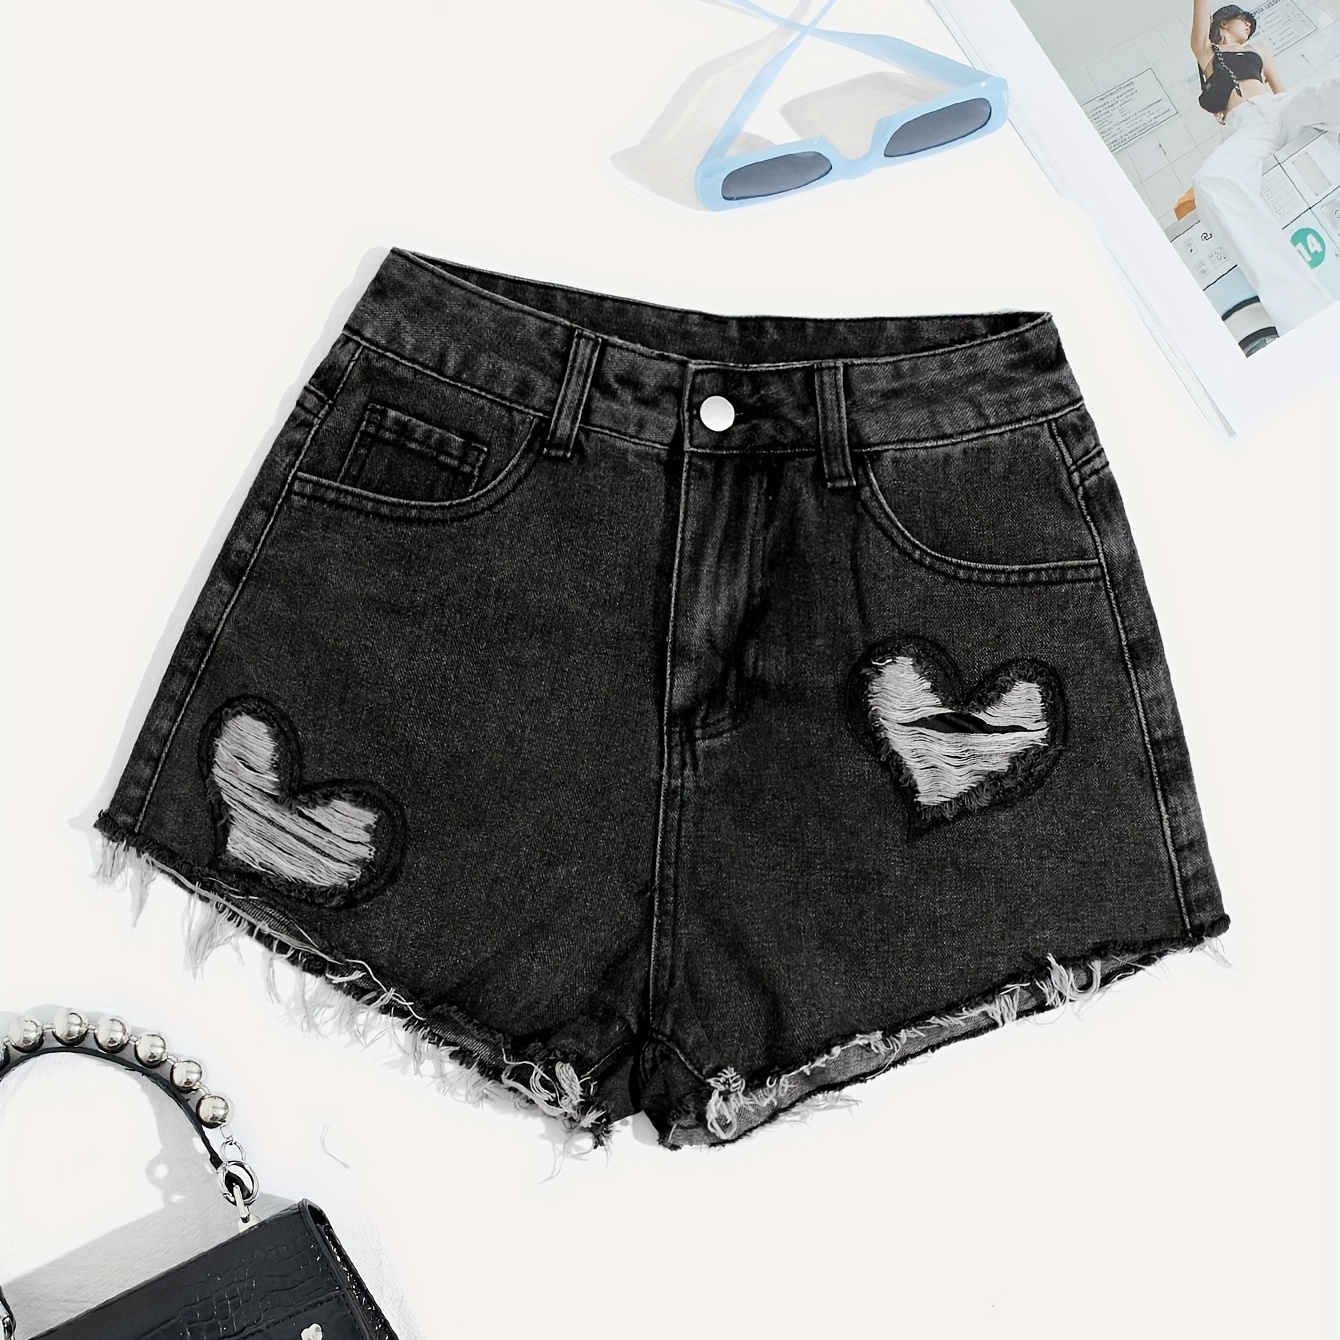 

Women's Casual Denim Shorts, Black Color Ripped High-waisted With Frayed Hem And Heart Cutouts, Summer Fashion Jean Shorts